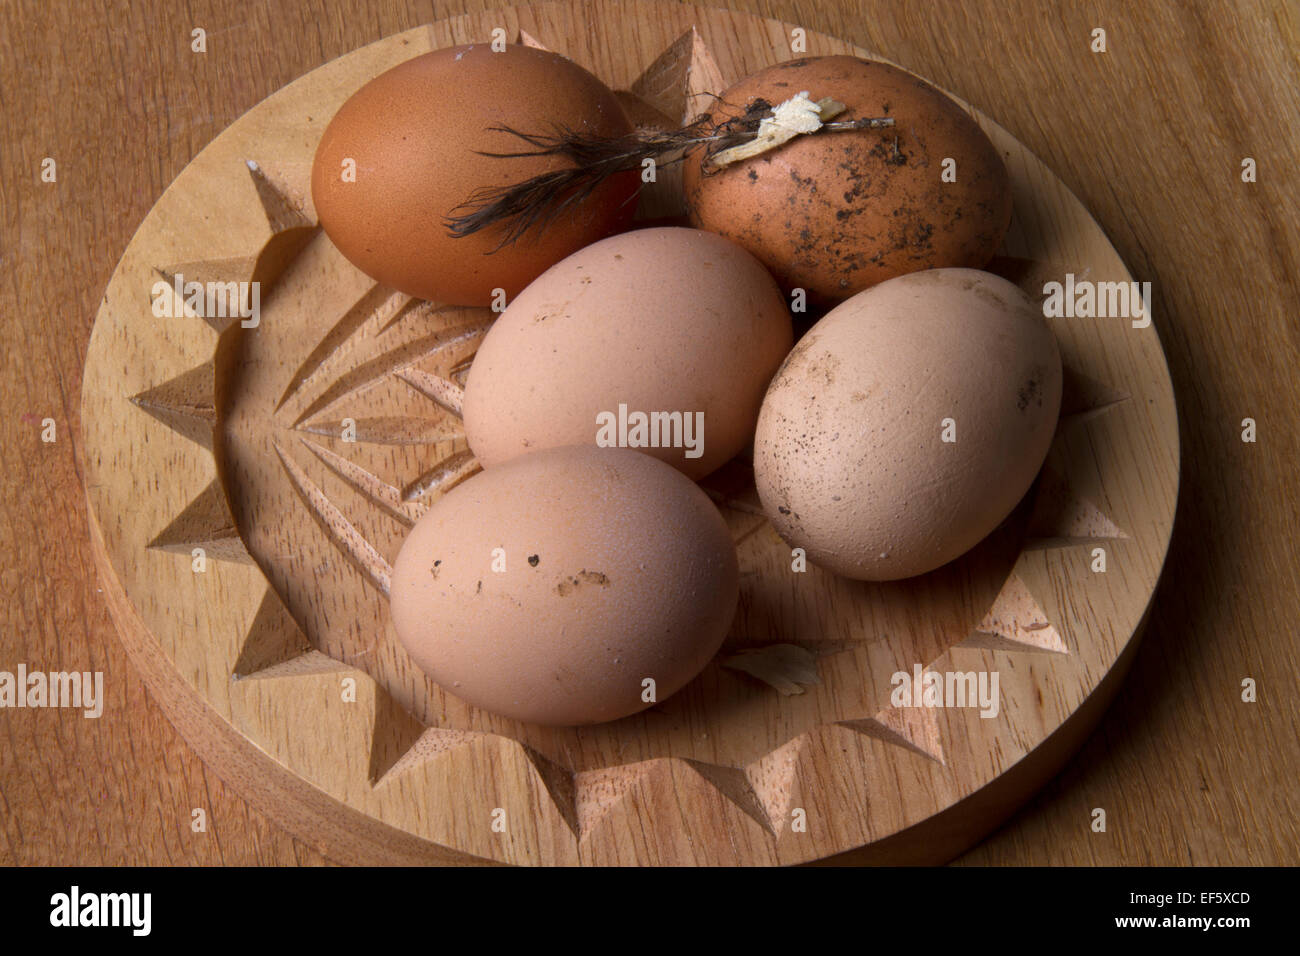 Freshly laid, unwashed chicken's eggs on a wooden dish Stock Photo